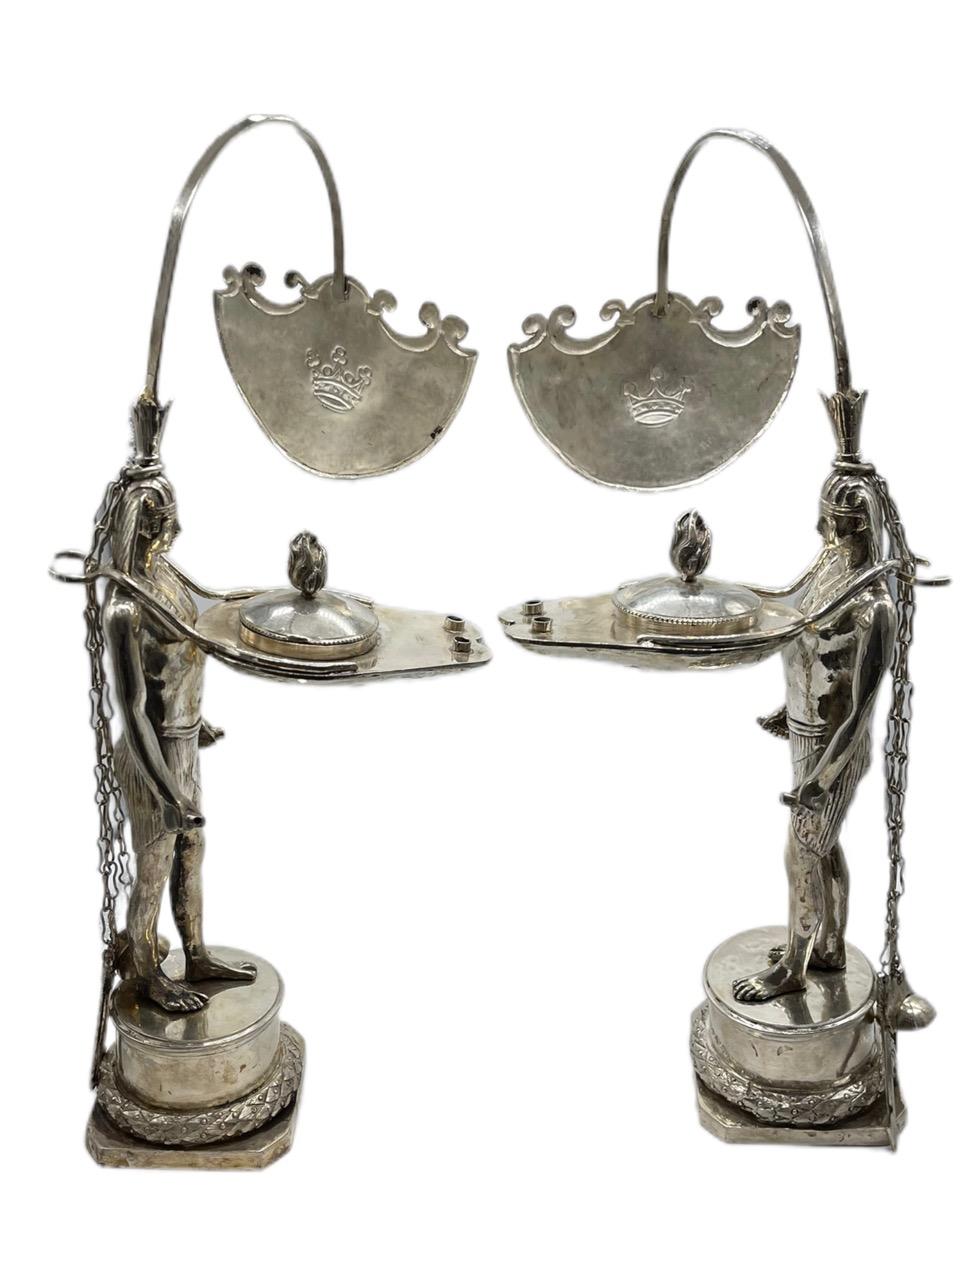 Pair of Early 19th Century Italian Antique Silver Oil Lamps by Vincenzo Belli II In Fair Condition For Sale In North Miami, FL